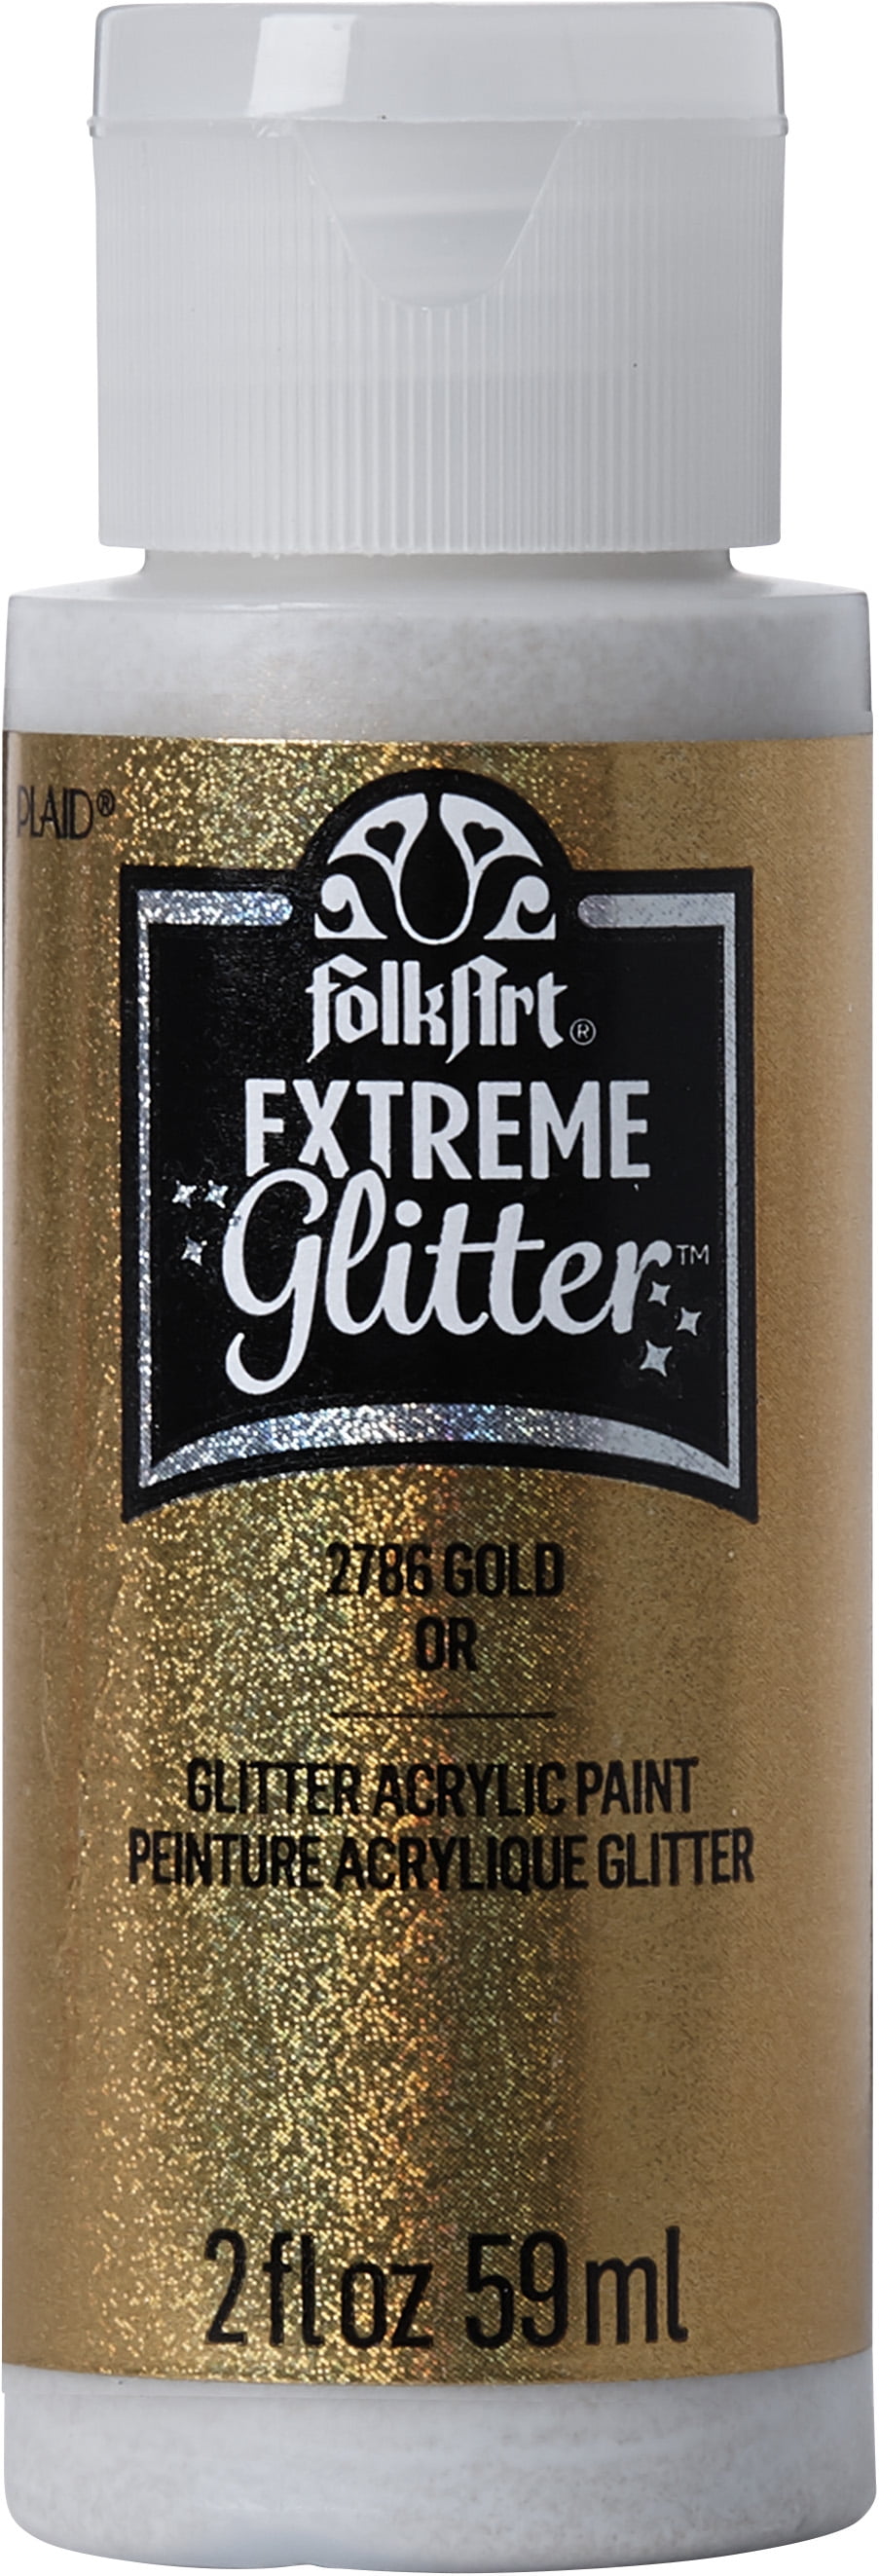 Extreme acrylic glitter paint, 59 ml, for paper, terracotta, wood etc